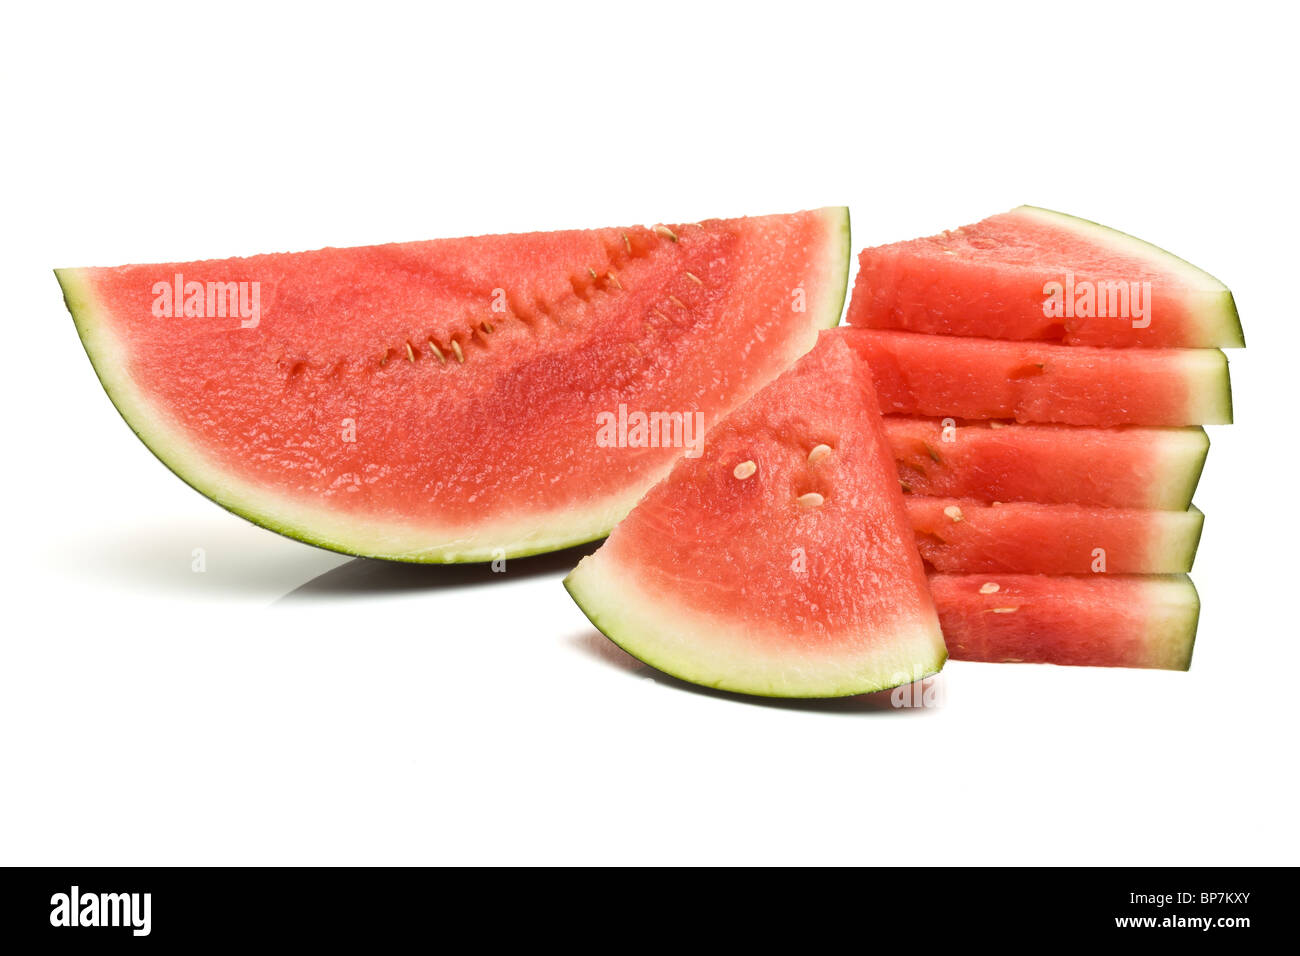 Abstract image of different shaped Watermelon segments isolated against white. Stock Photo